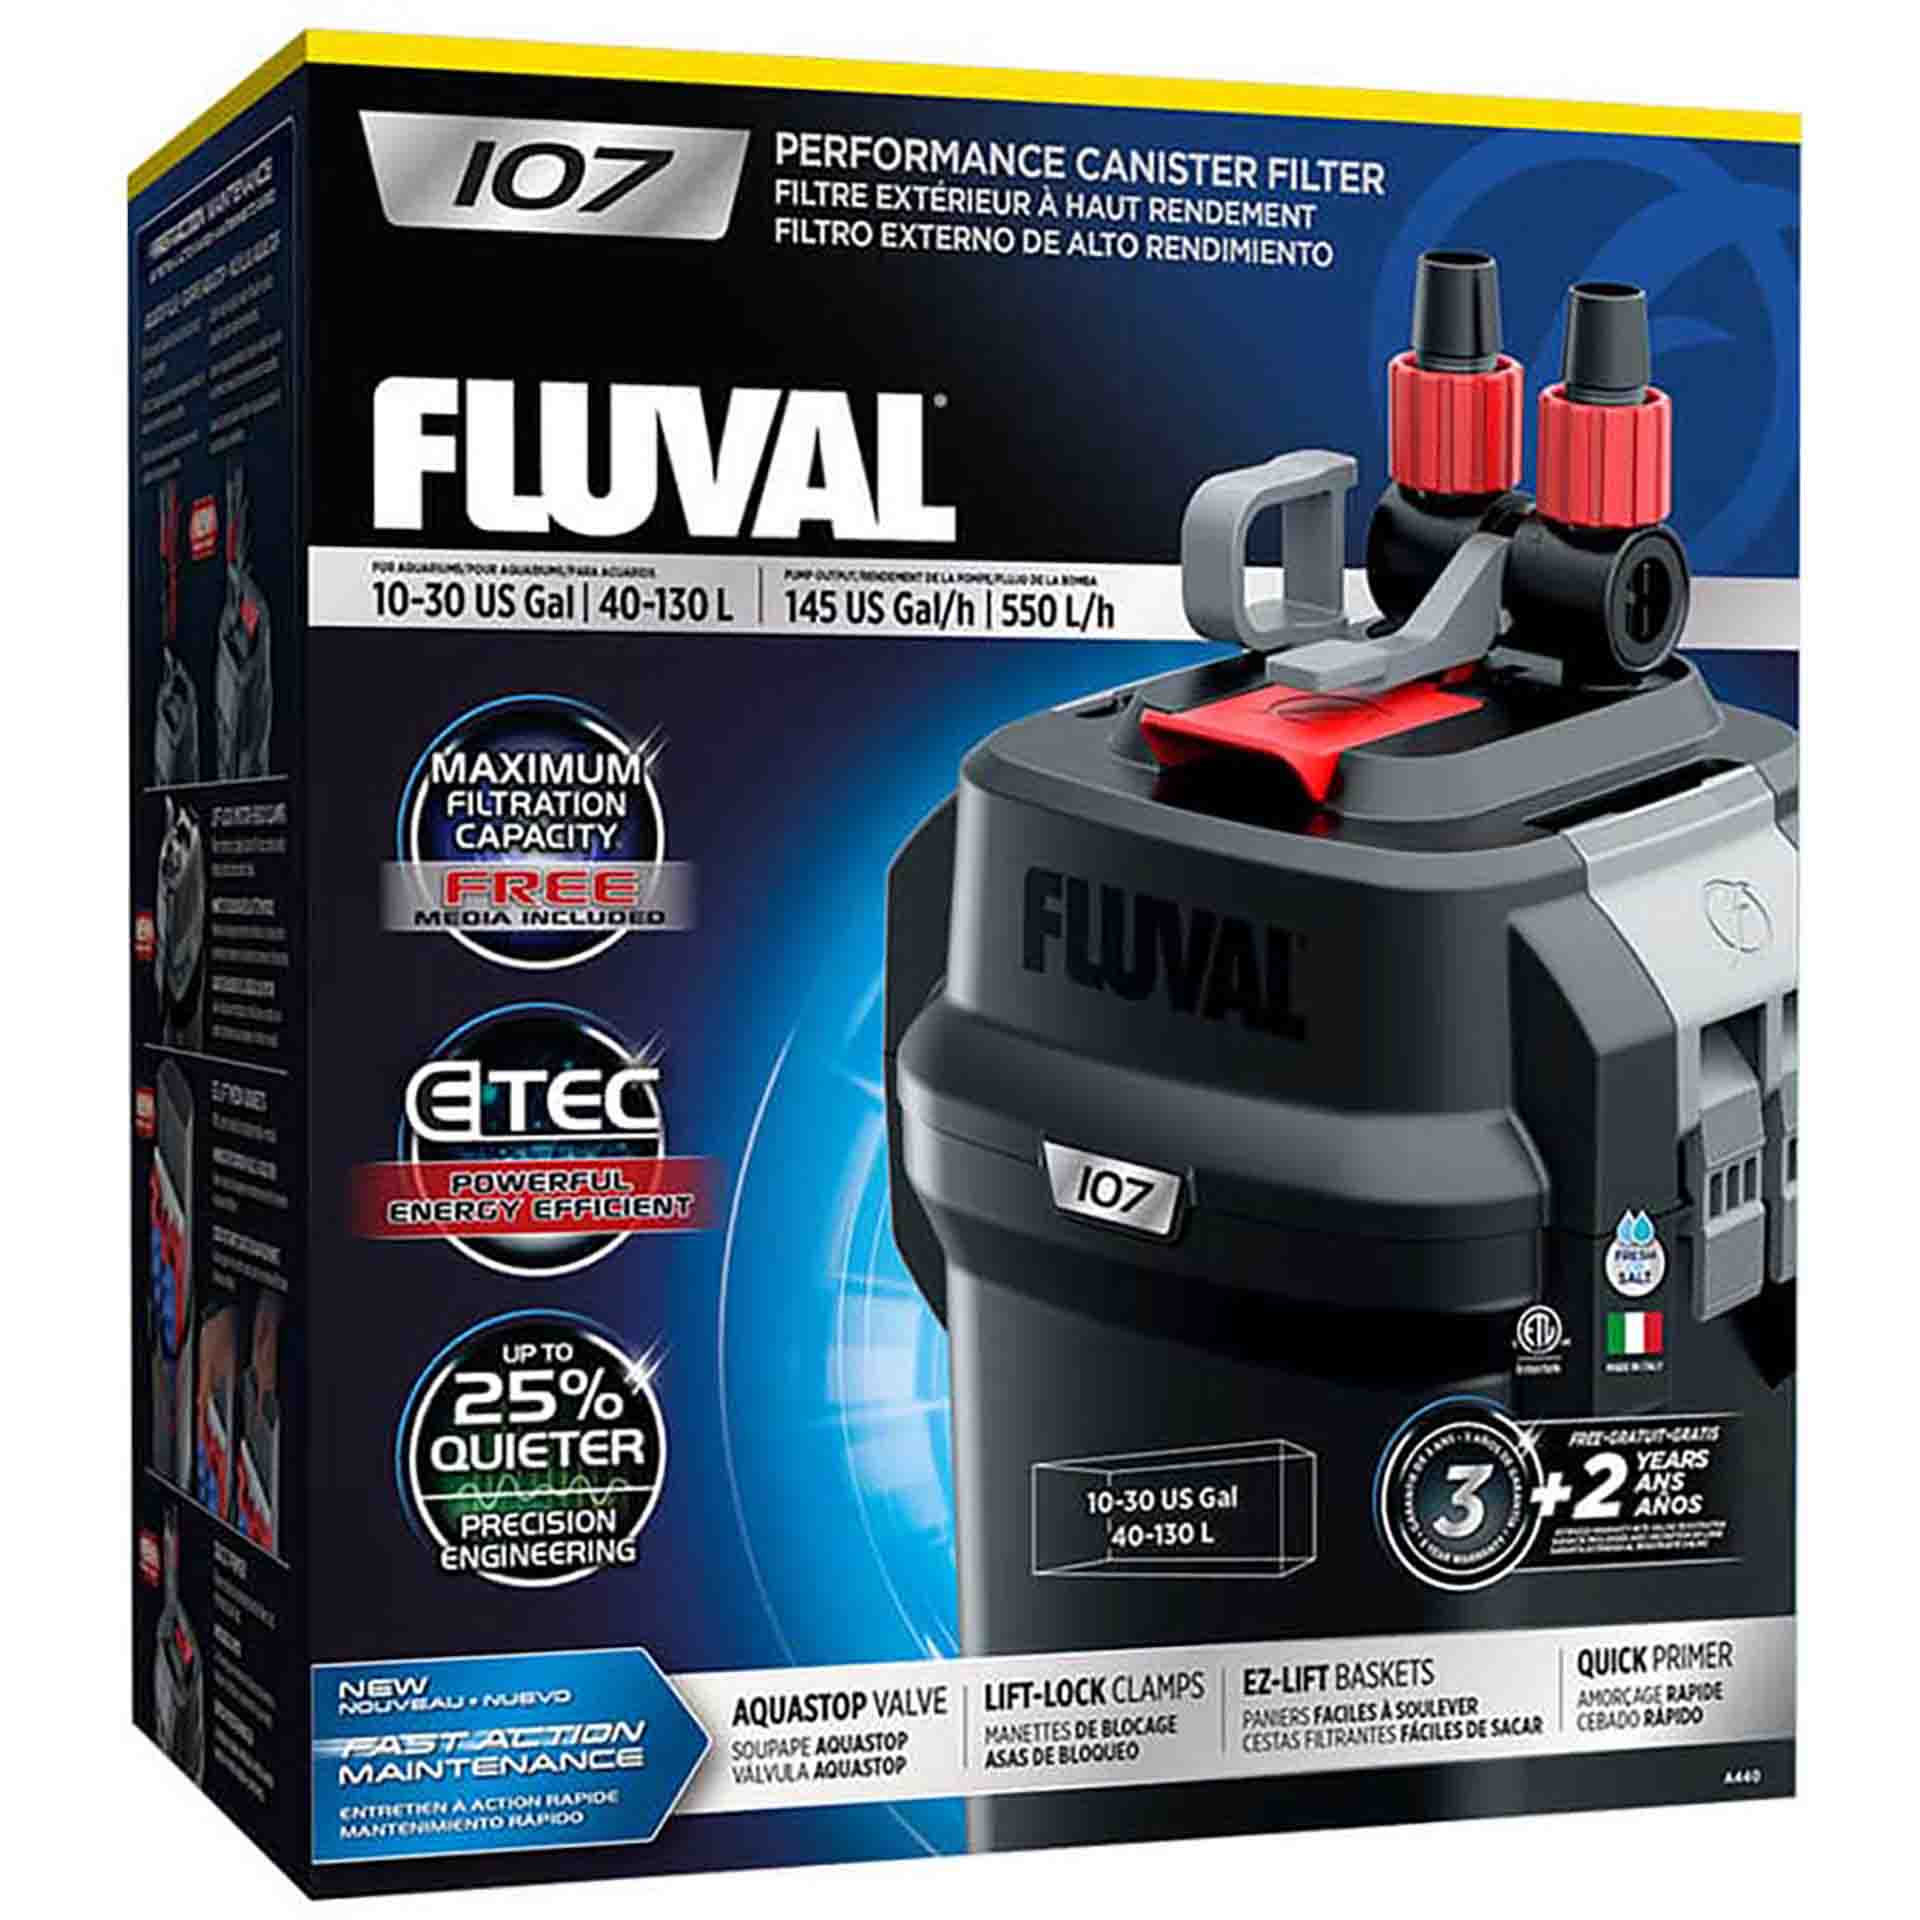 Fluval 107 Performance Canister Filter, up to 130 L Aquarium - The Tech Den